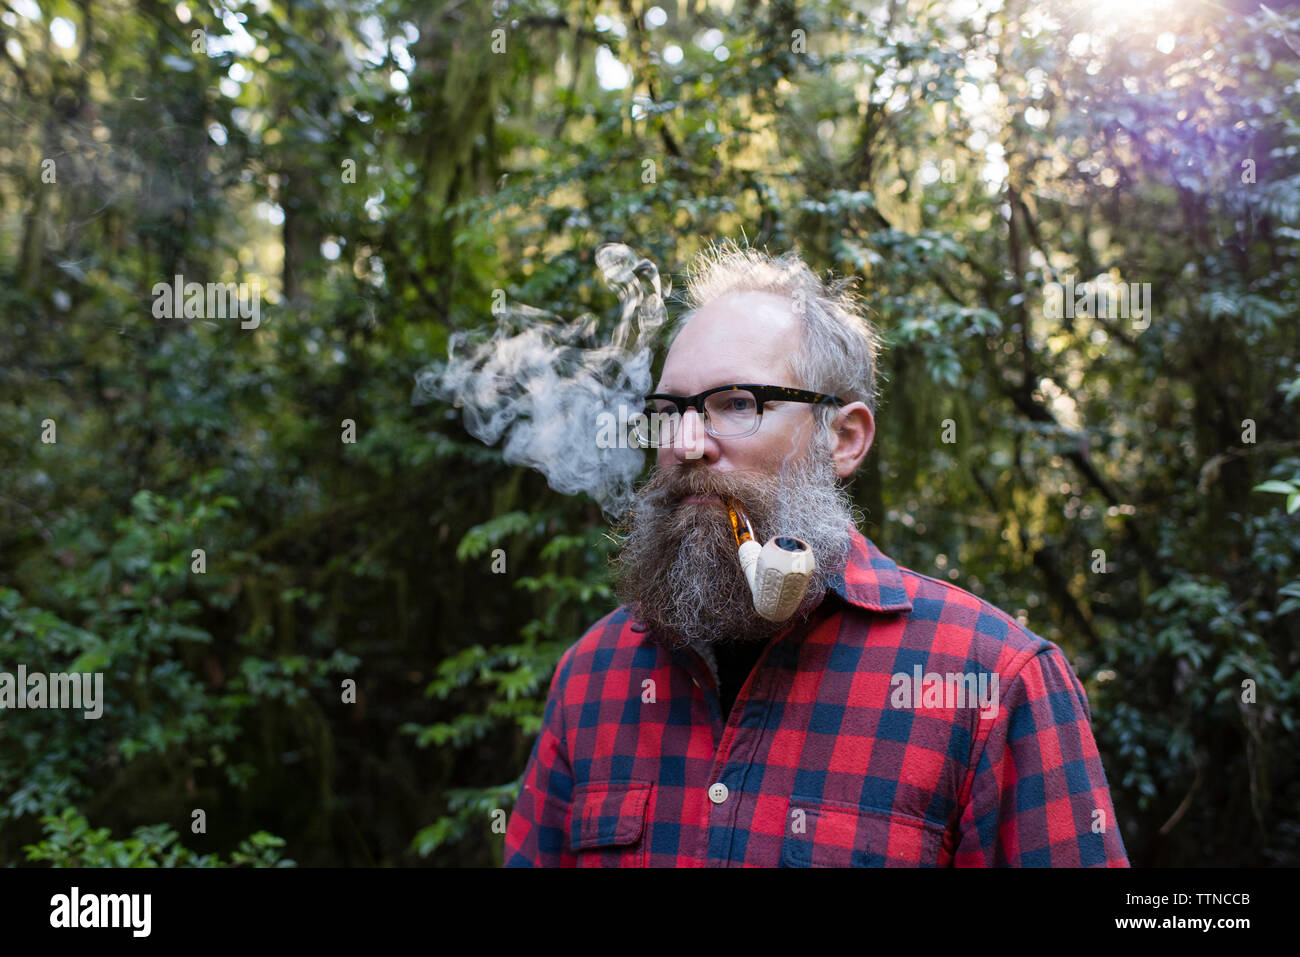 Man smoking pipe while standing against trees Stock Photo